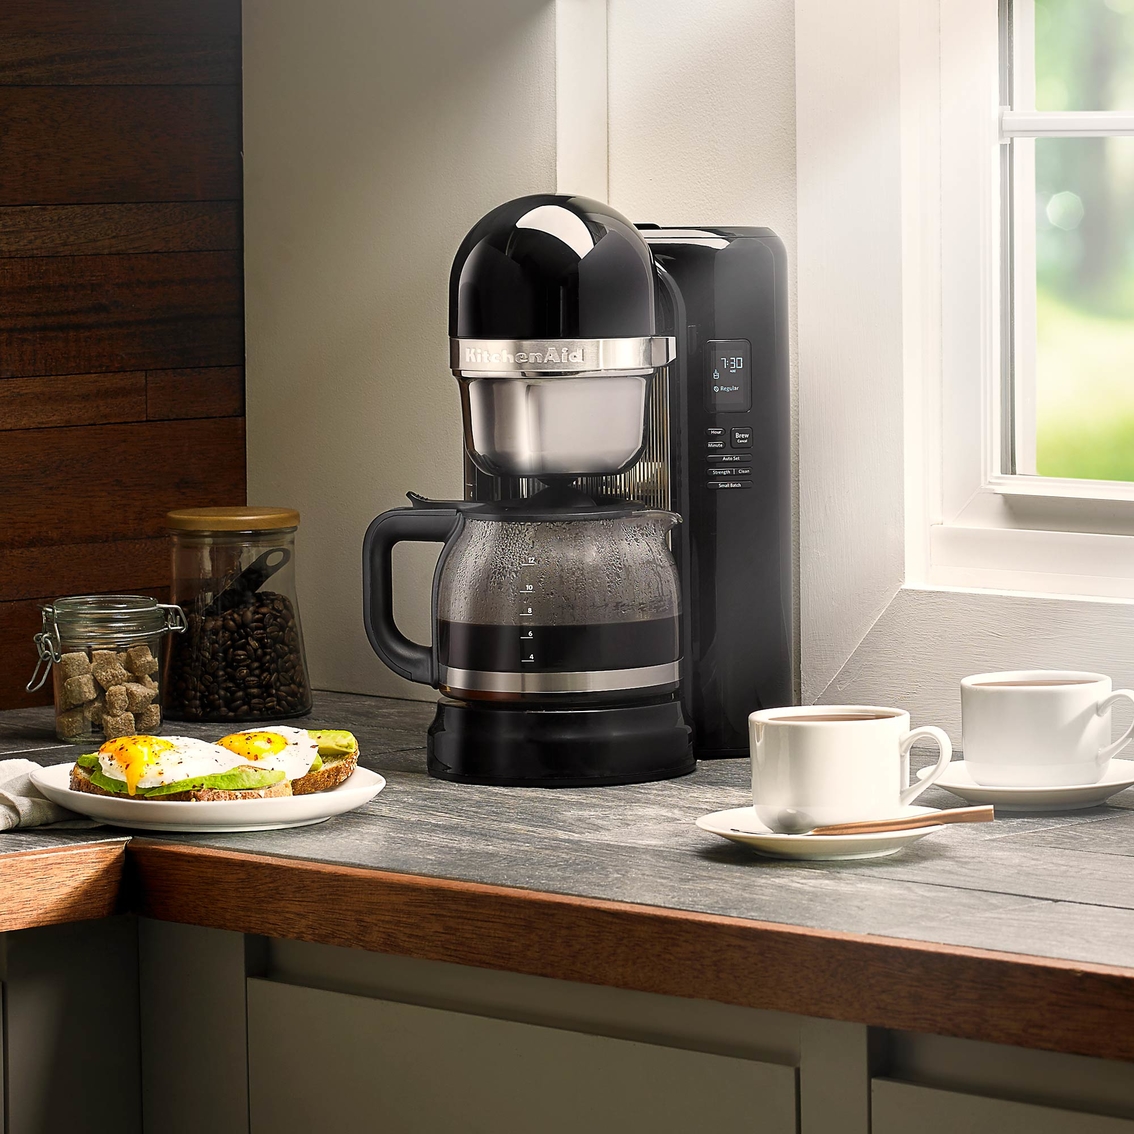 (D) KitchenAid 12 cup Design Series Coffee Maker - Image 3 of 3